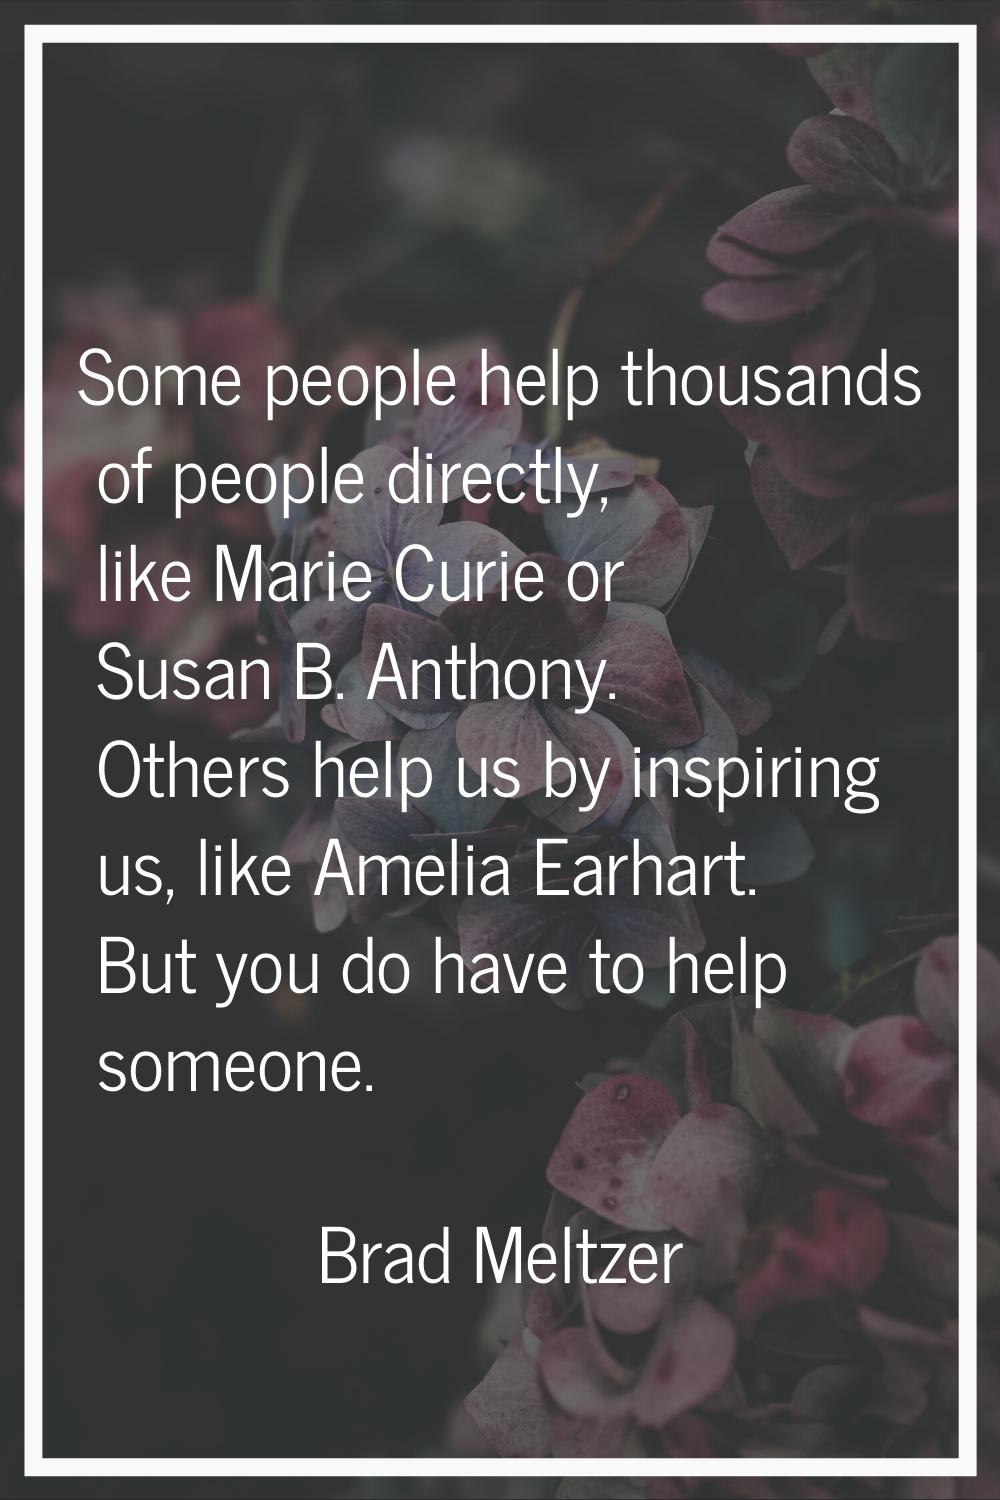 Some people help thousands of people directly, like Marie Curie or Susan B. Anthony. Others help us